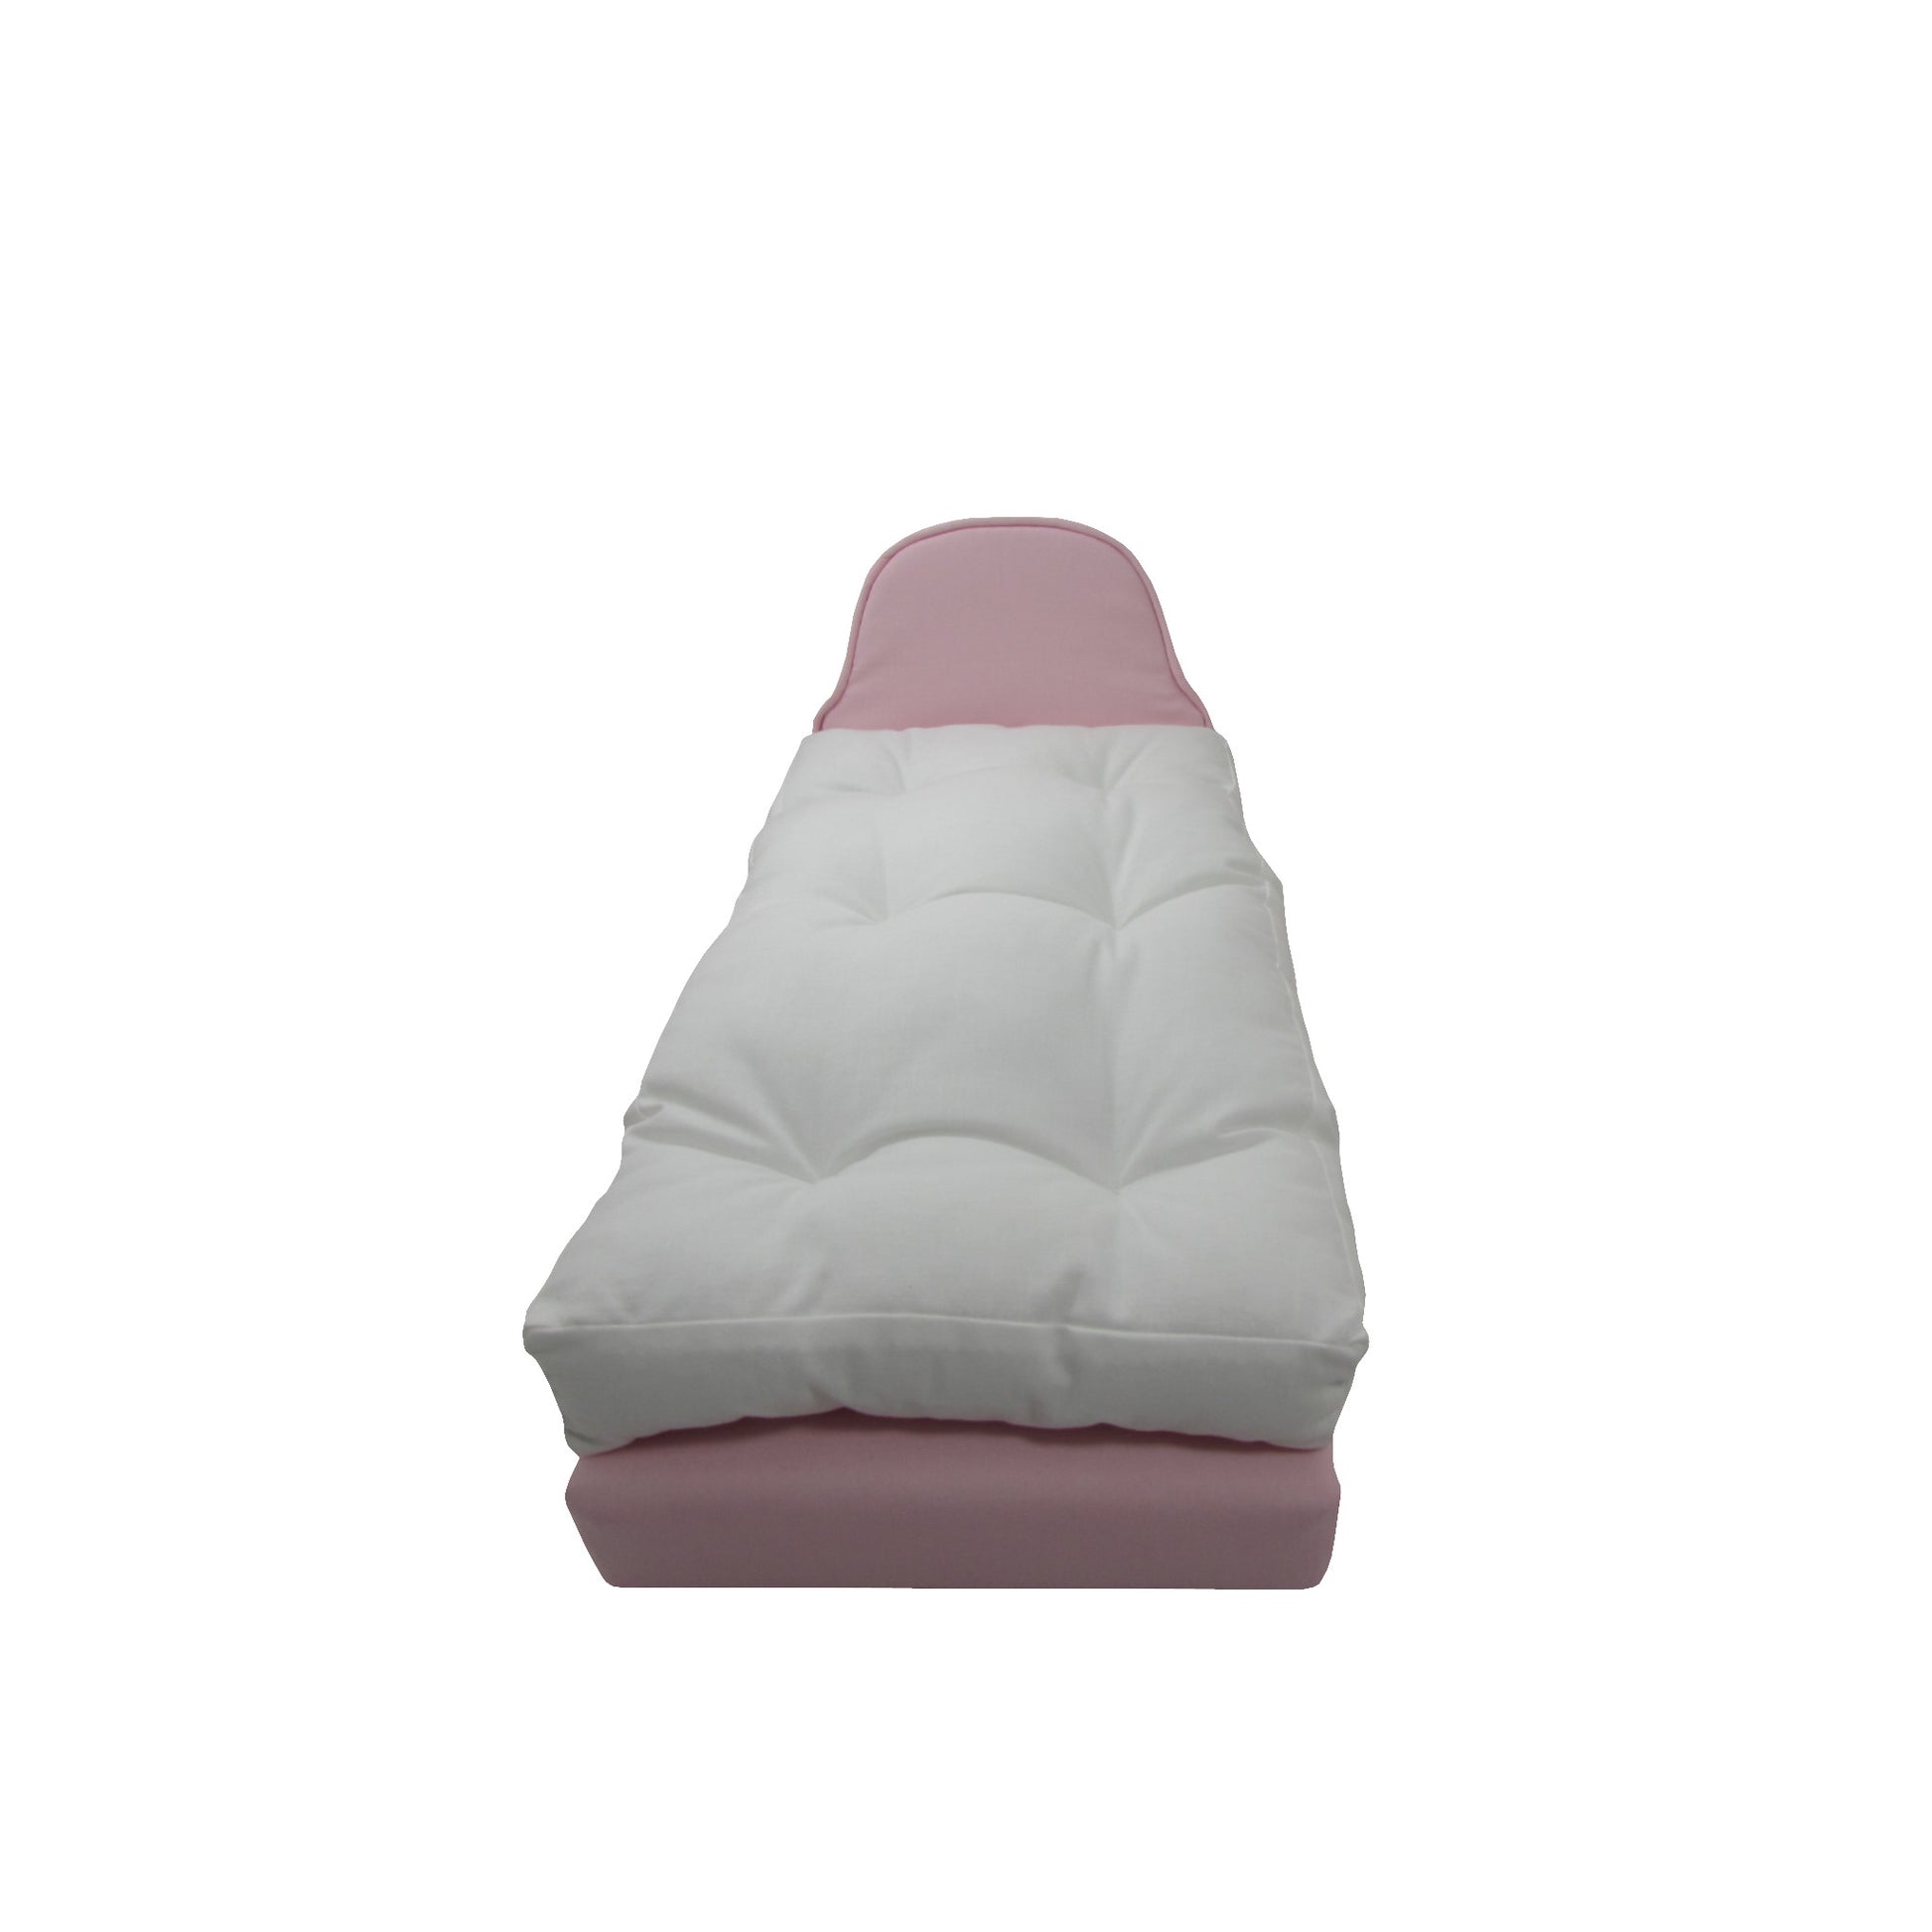 Upholstered Light Pink Doll Bed for 14.5-inch dolls Second view